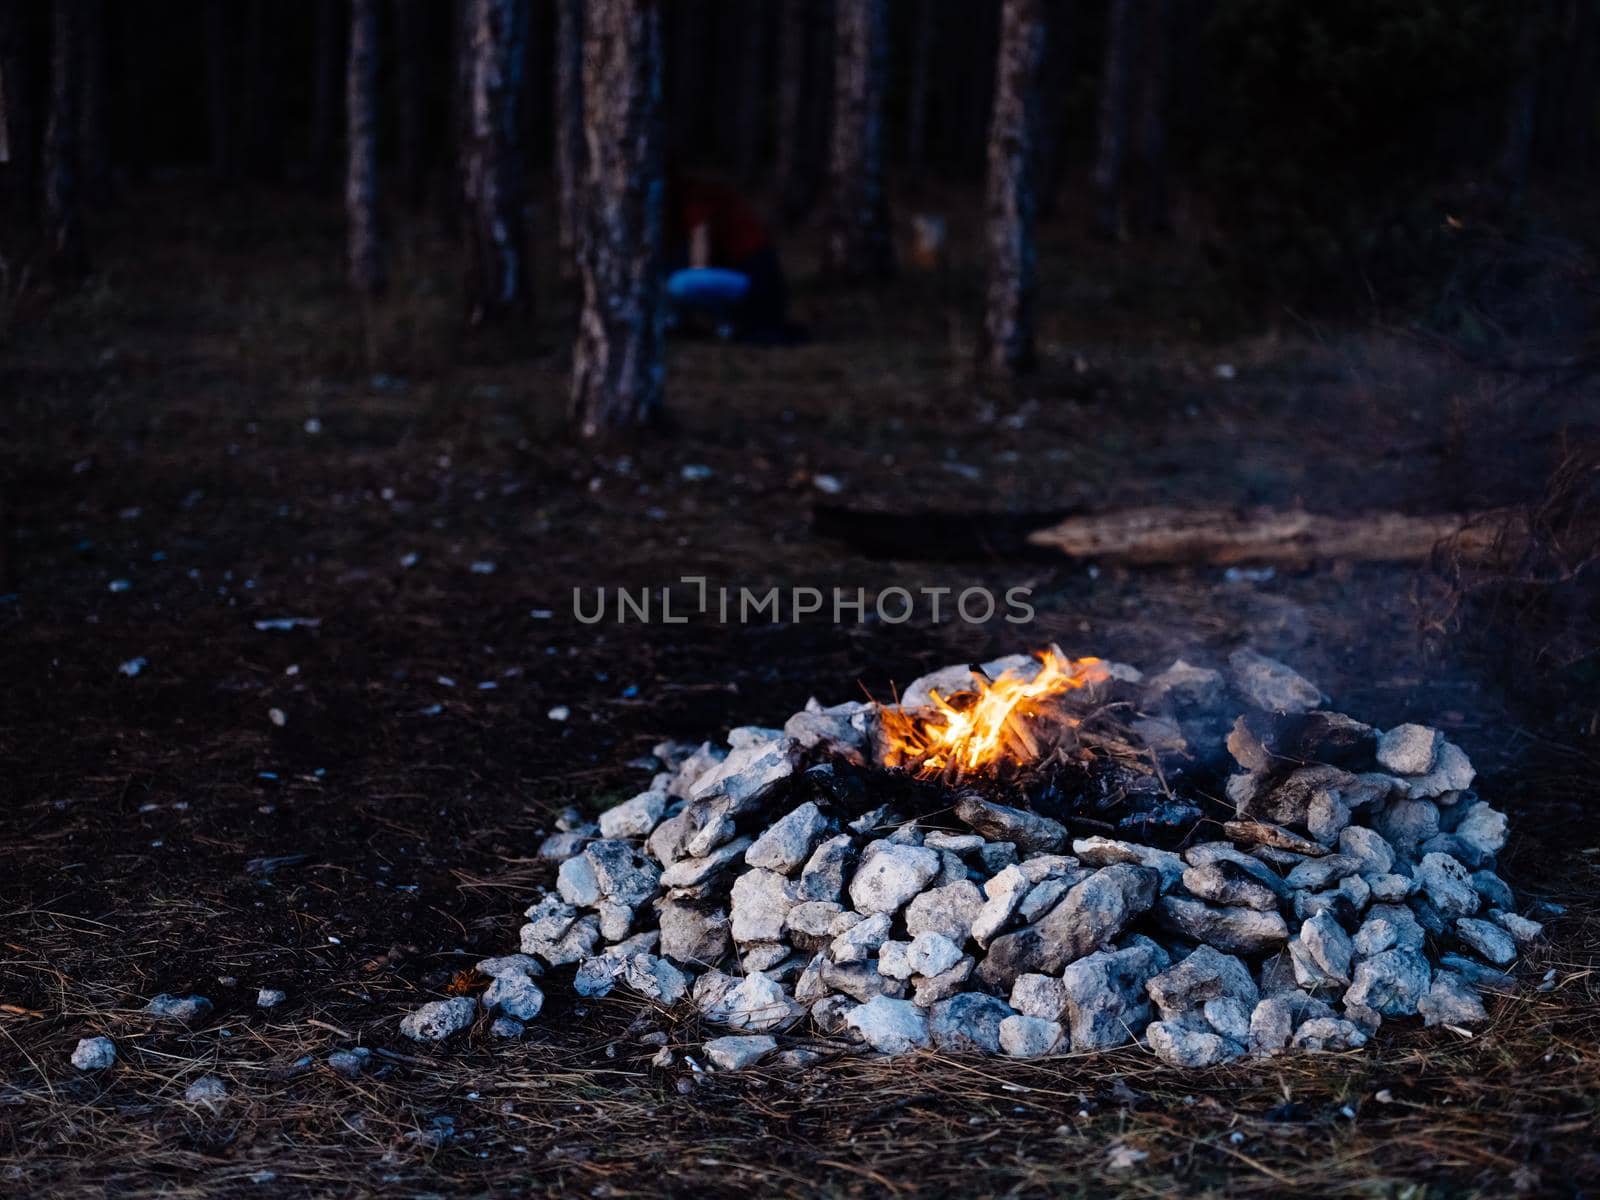 kindled fire in nature in the forest and trees In the background by SHOTPRIME